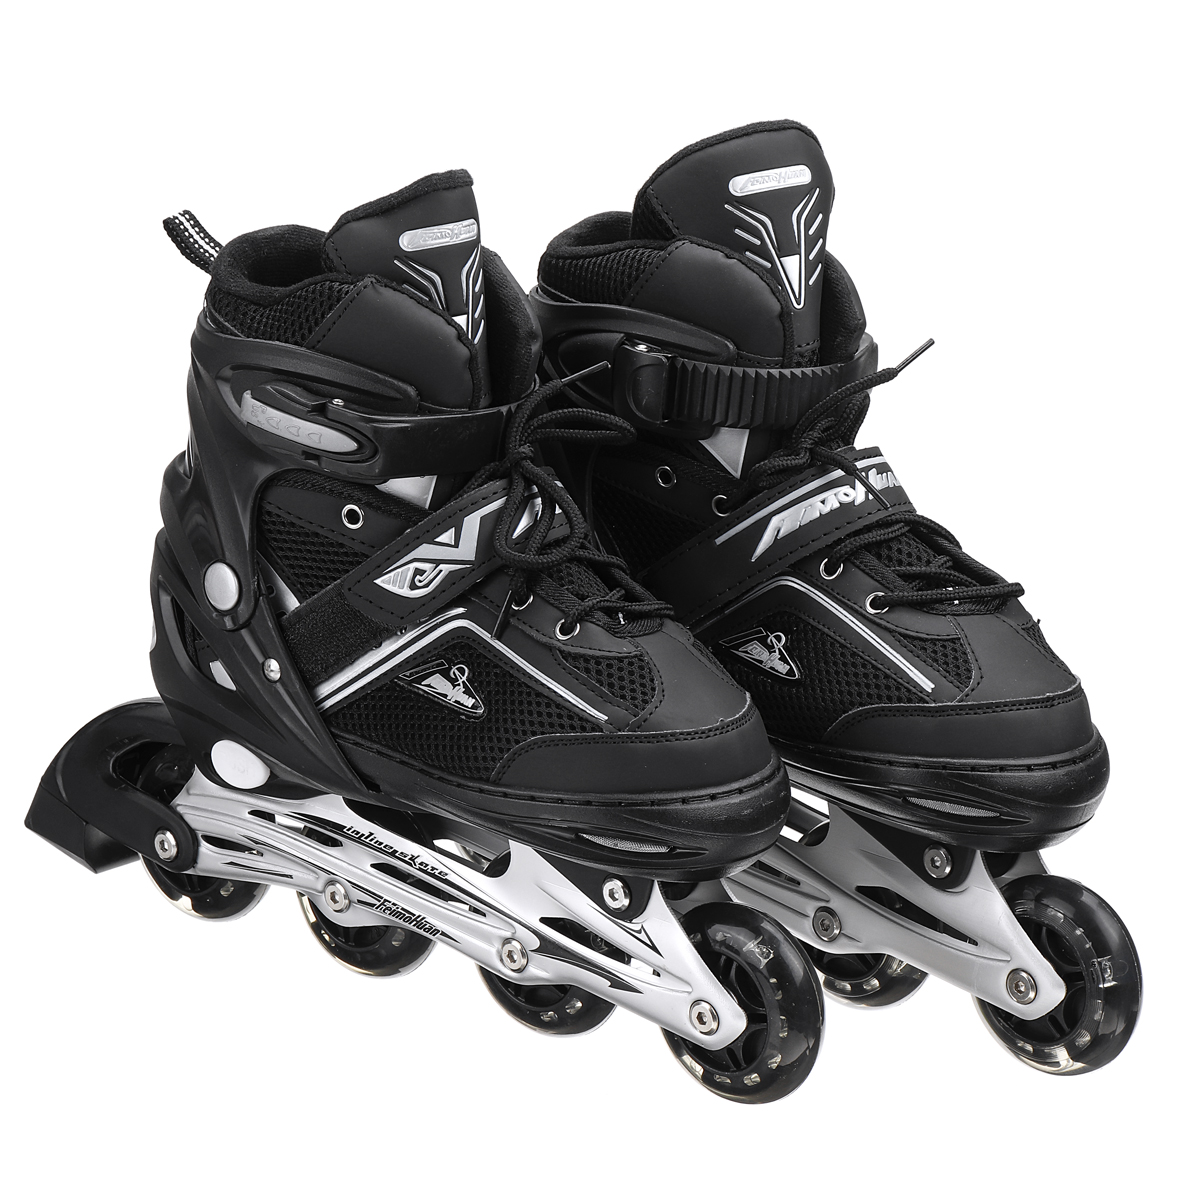 4-Size-Adjustable-SafeDurable-Inline-Skates-for-Kids-and-Adults-Outdoor-Blades-Roller-Skates-with-Fu-1827194-12